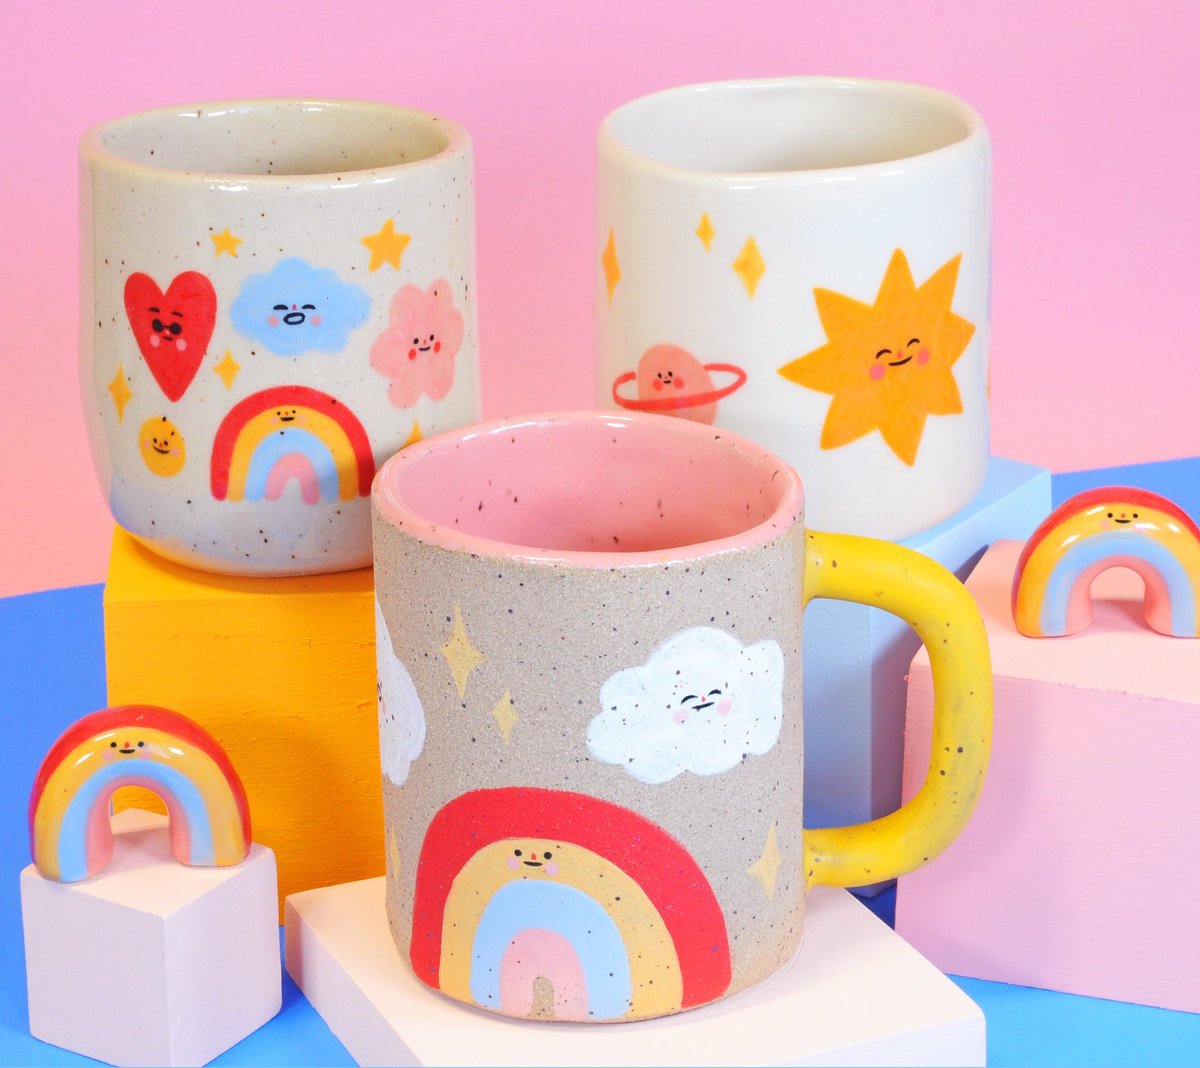 Happy 4th of July! Aubrey Aiese, the talented Brooklyn-based illustrator and ceramic artist, is bringing a burst of color to FAD Market at @empirestoresnyc this weekend! 🌈 Don't miss her one-of-a-kind ceramics and meet Aubrey IRL 🎨😊 🗓 July 8+9 📍55 Water St., BKLYN ⏰ 11-6